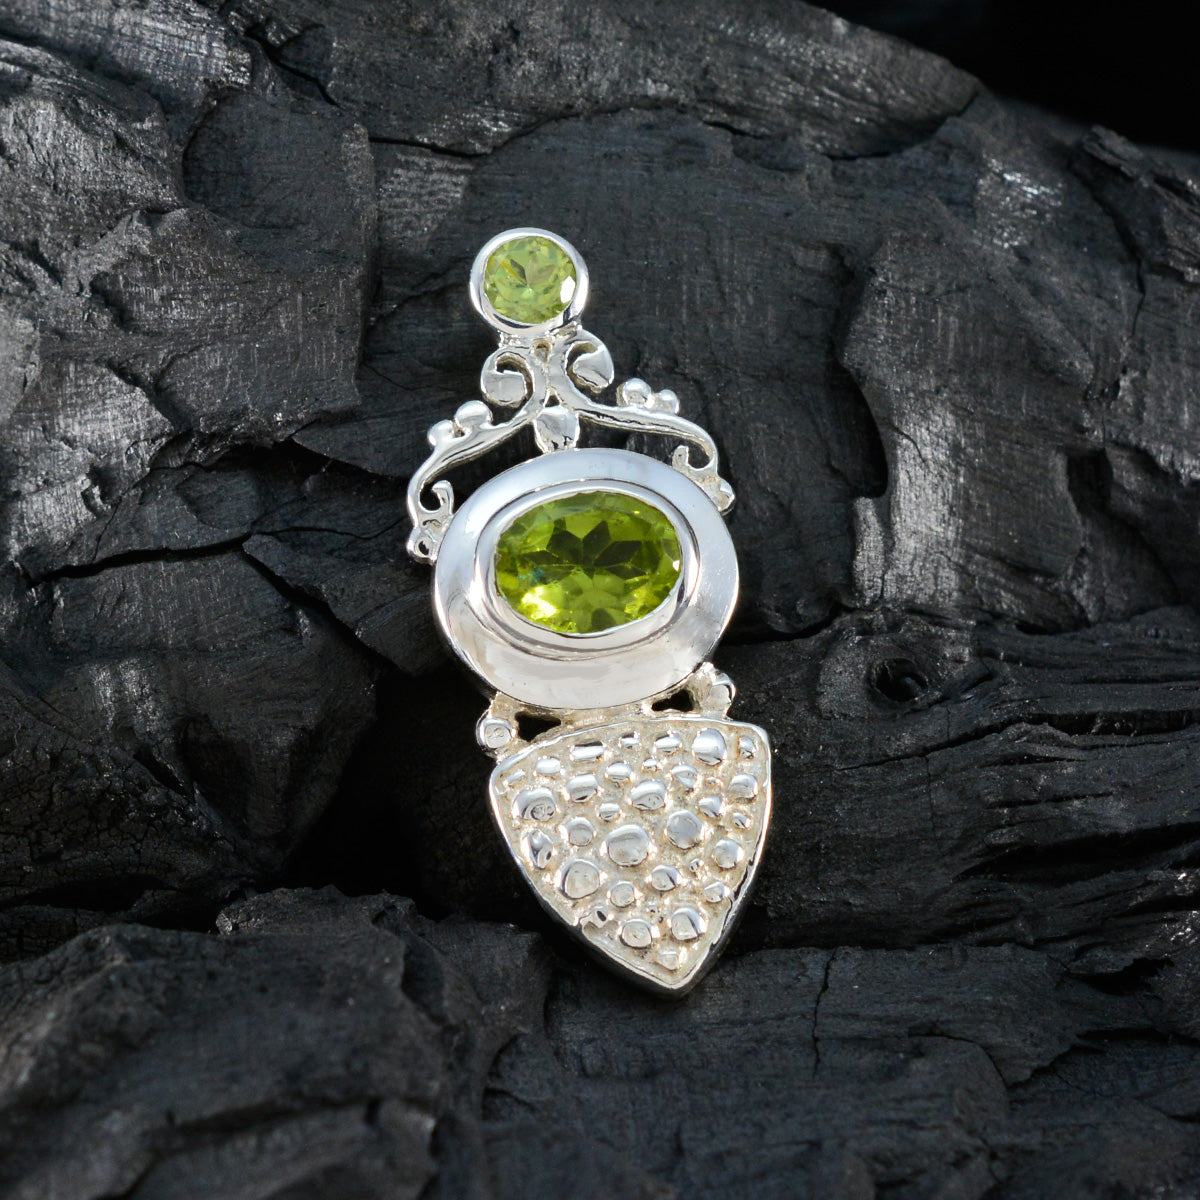 Riyo Attractive Gemstone Multi Faceted Green Peridot Sterling Silver Pendant Gift For Christmas